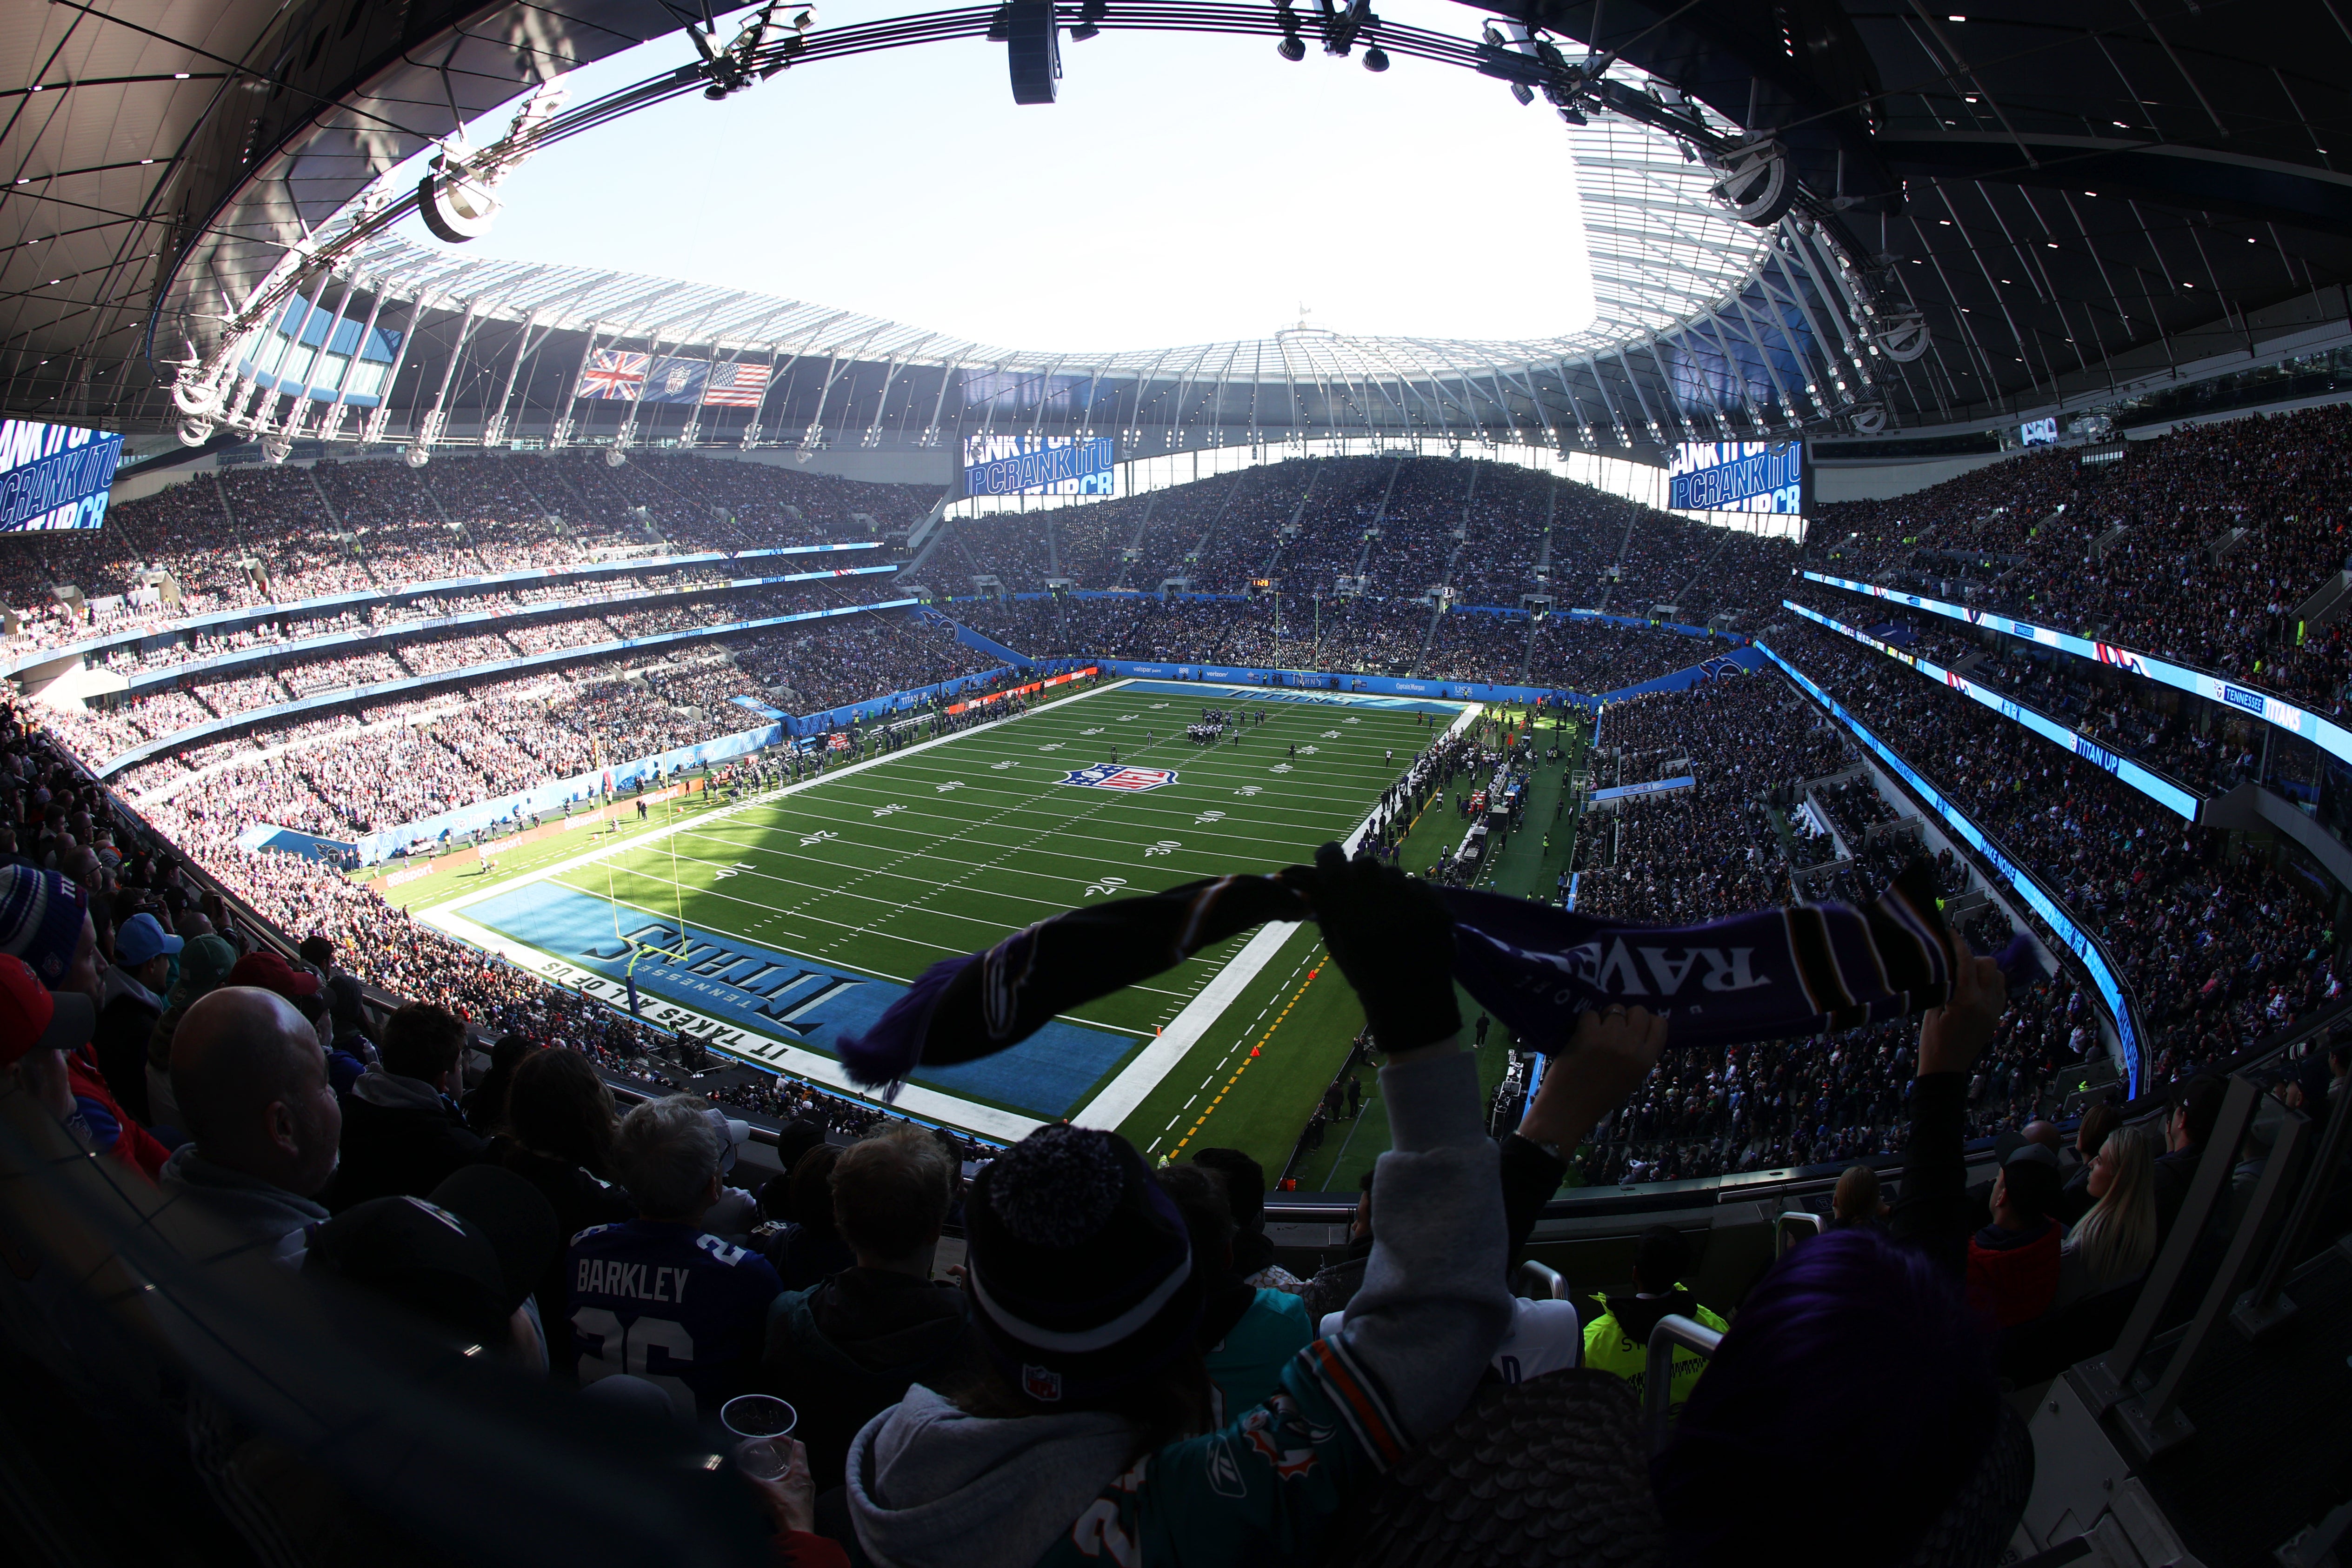 The NFL hosts games at the Tottenham Hotspur Stadium annually